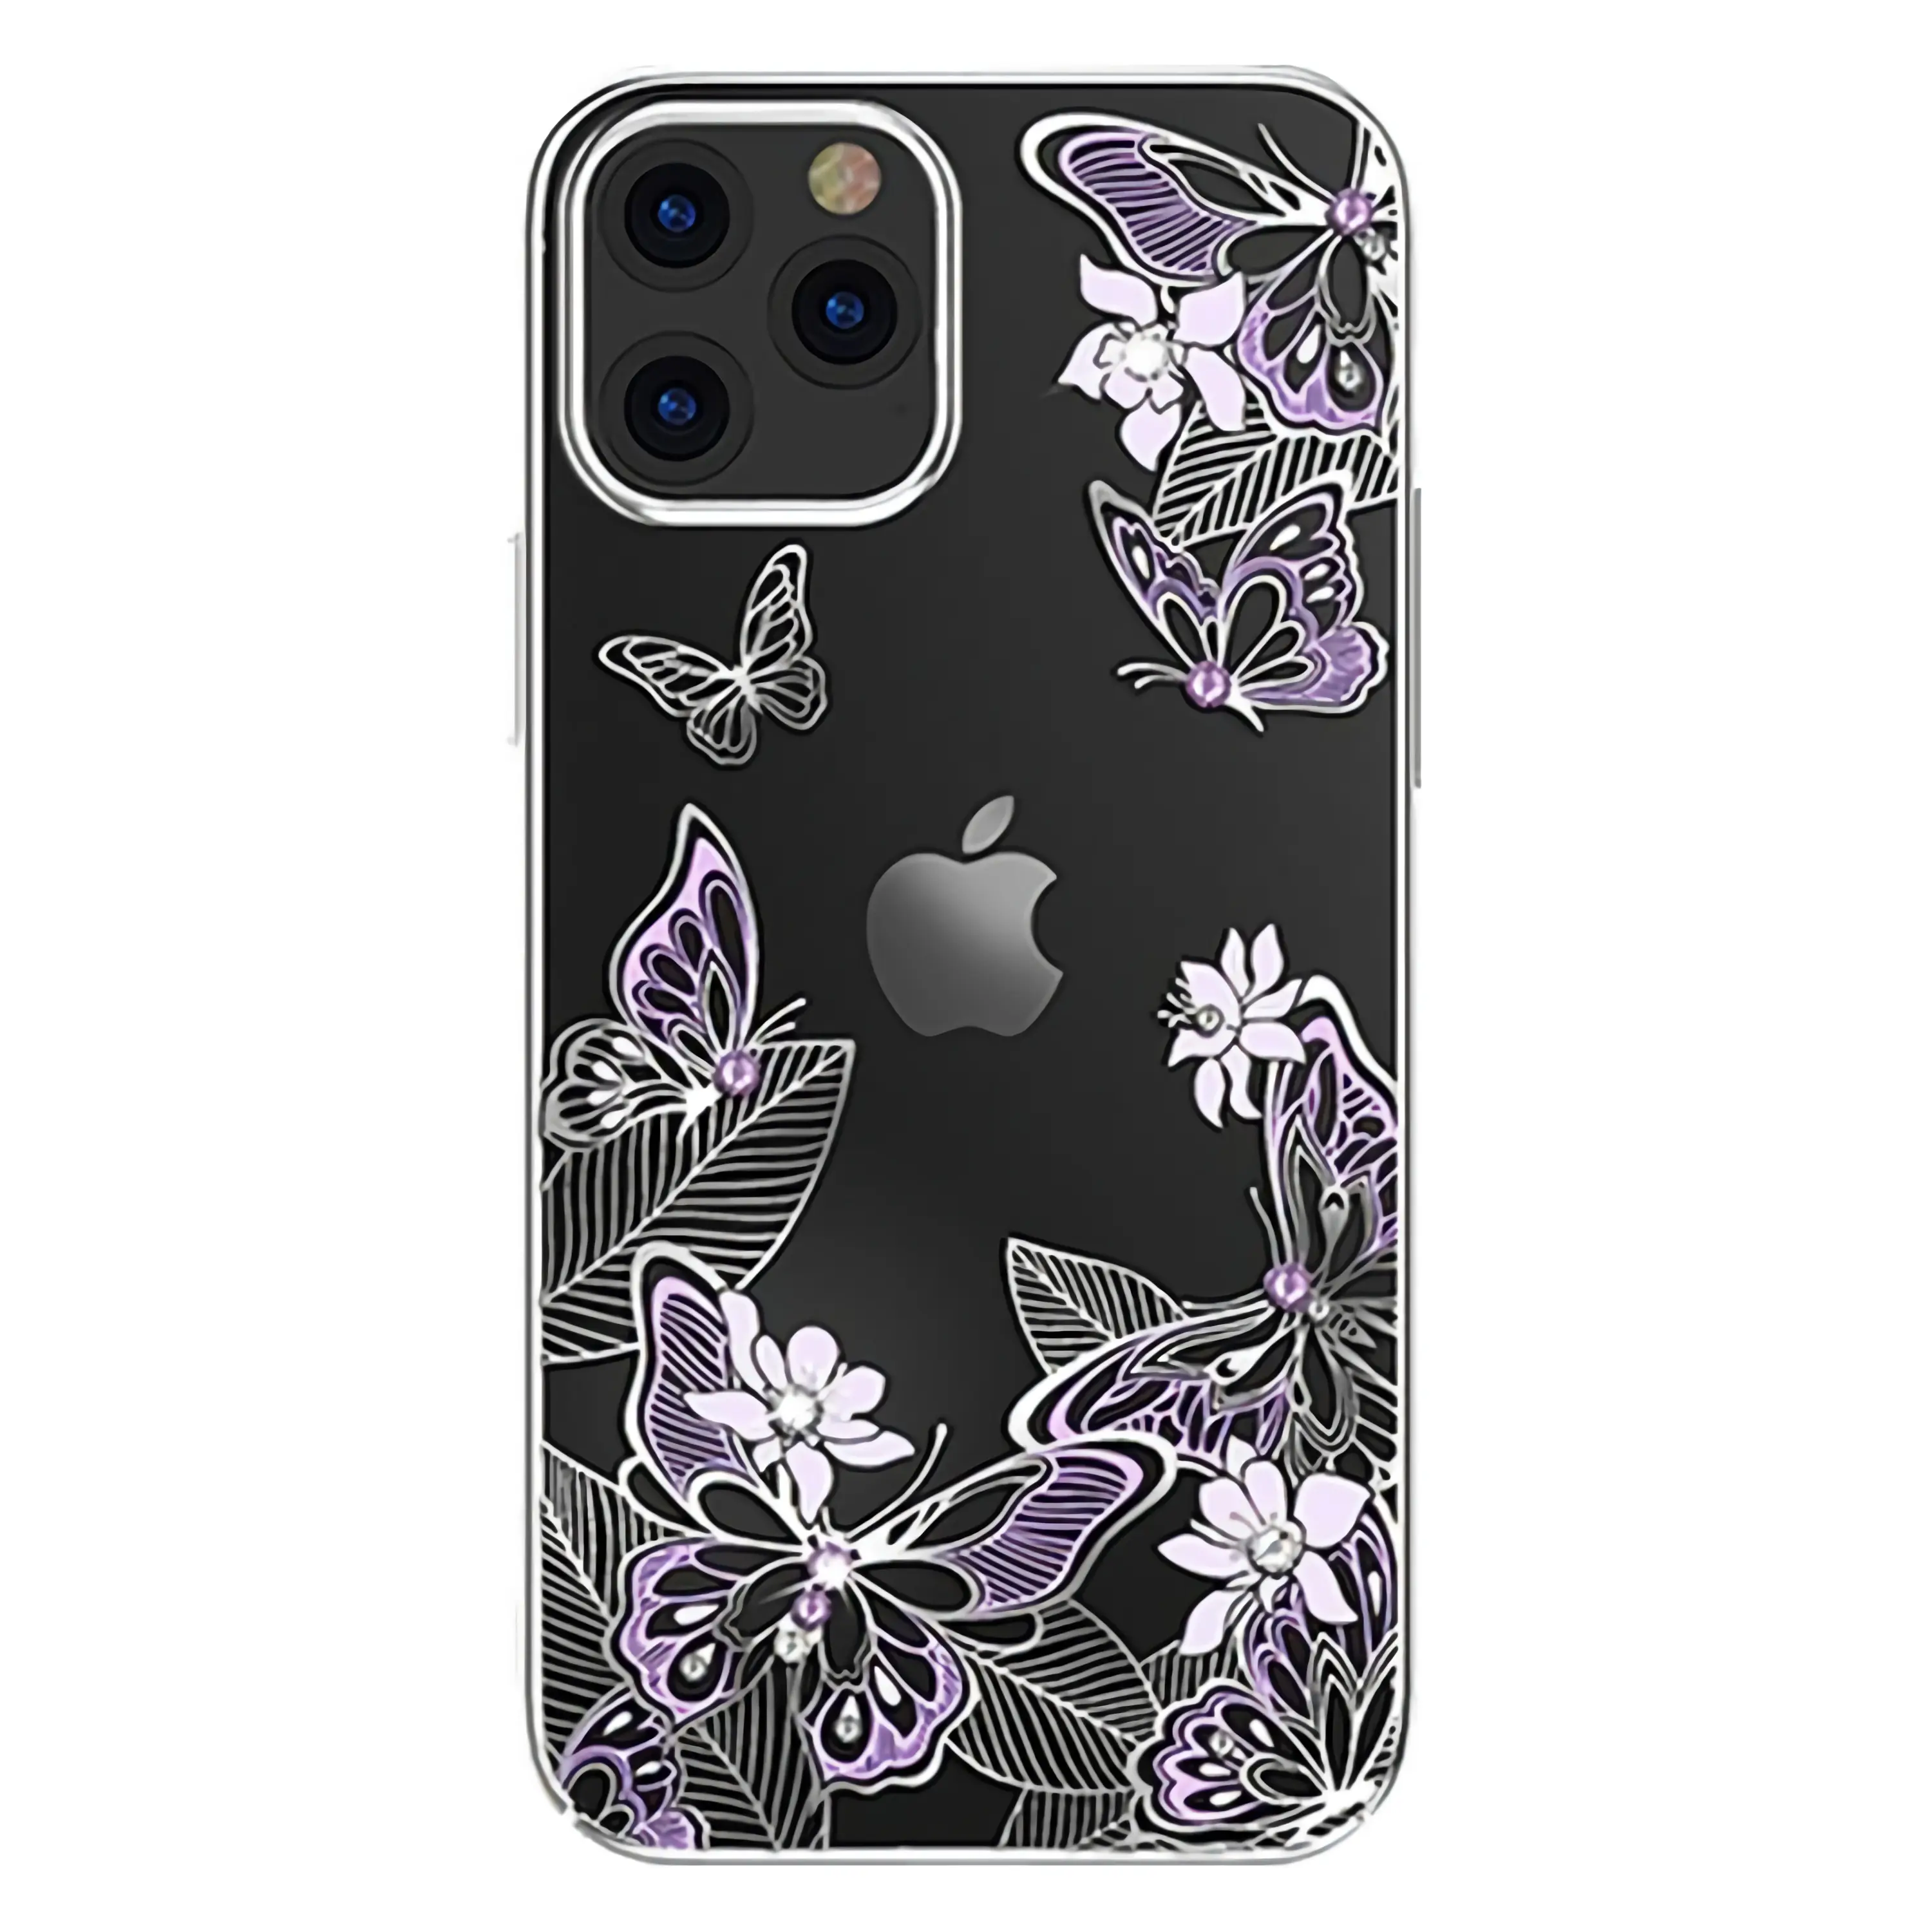 Mobile Phone Accessories Case Universal TPU and PC mixture material Crystal Luxus Phone Caso Cover For Iphone 12 mini 12 pro max